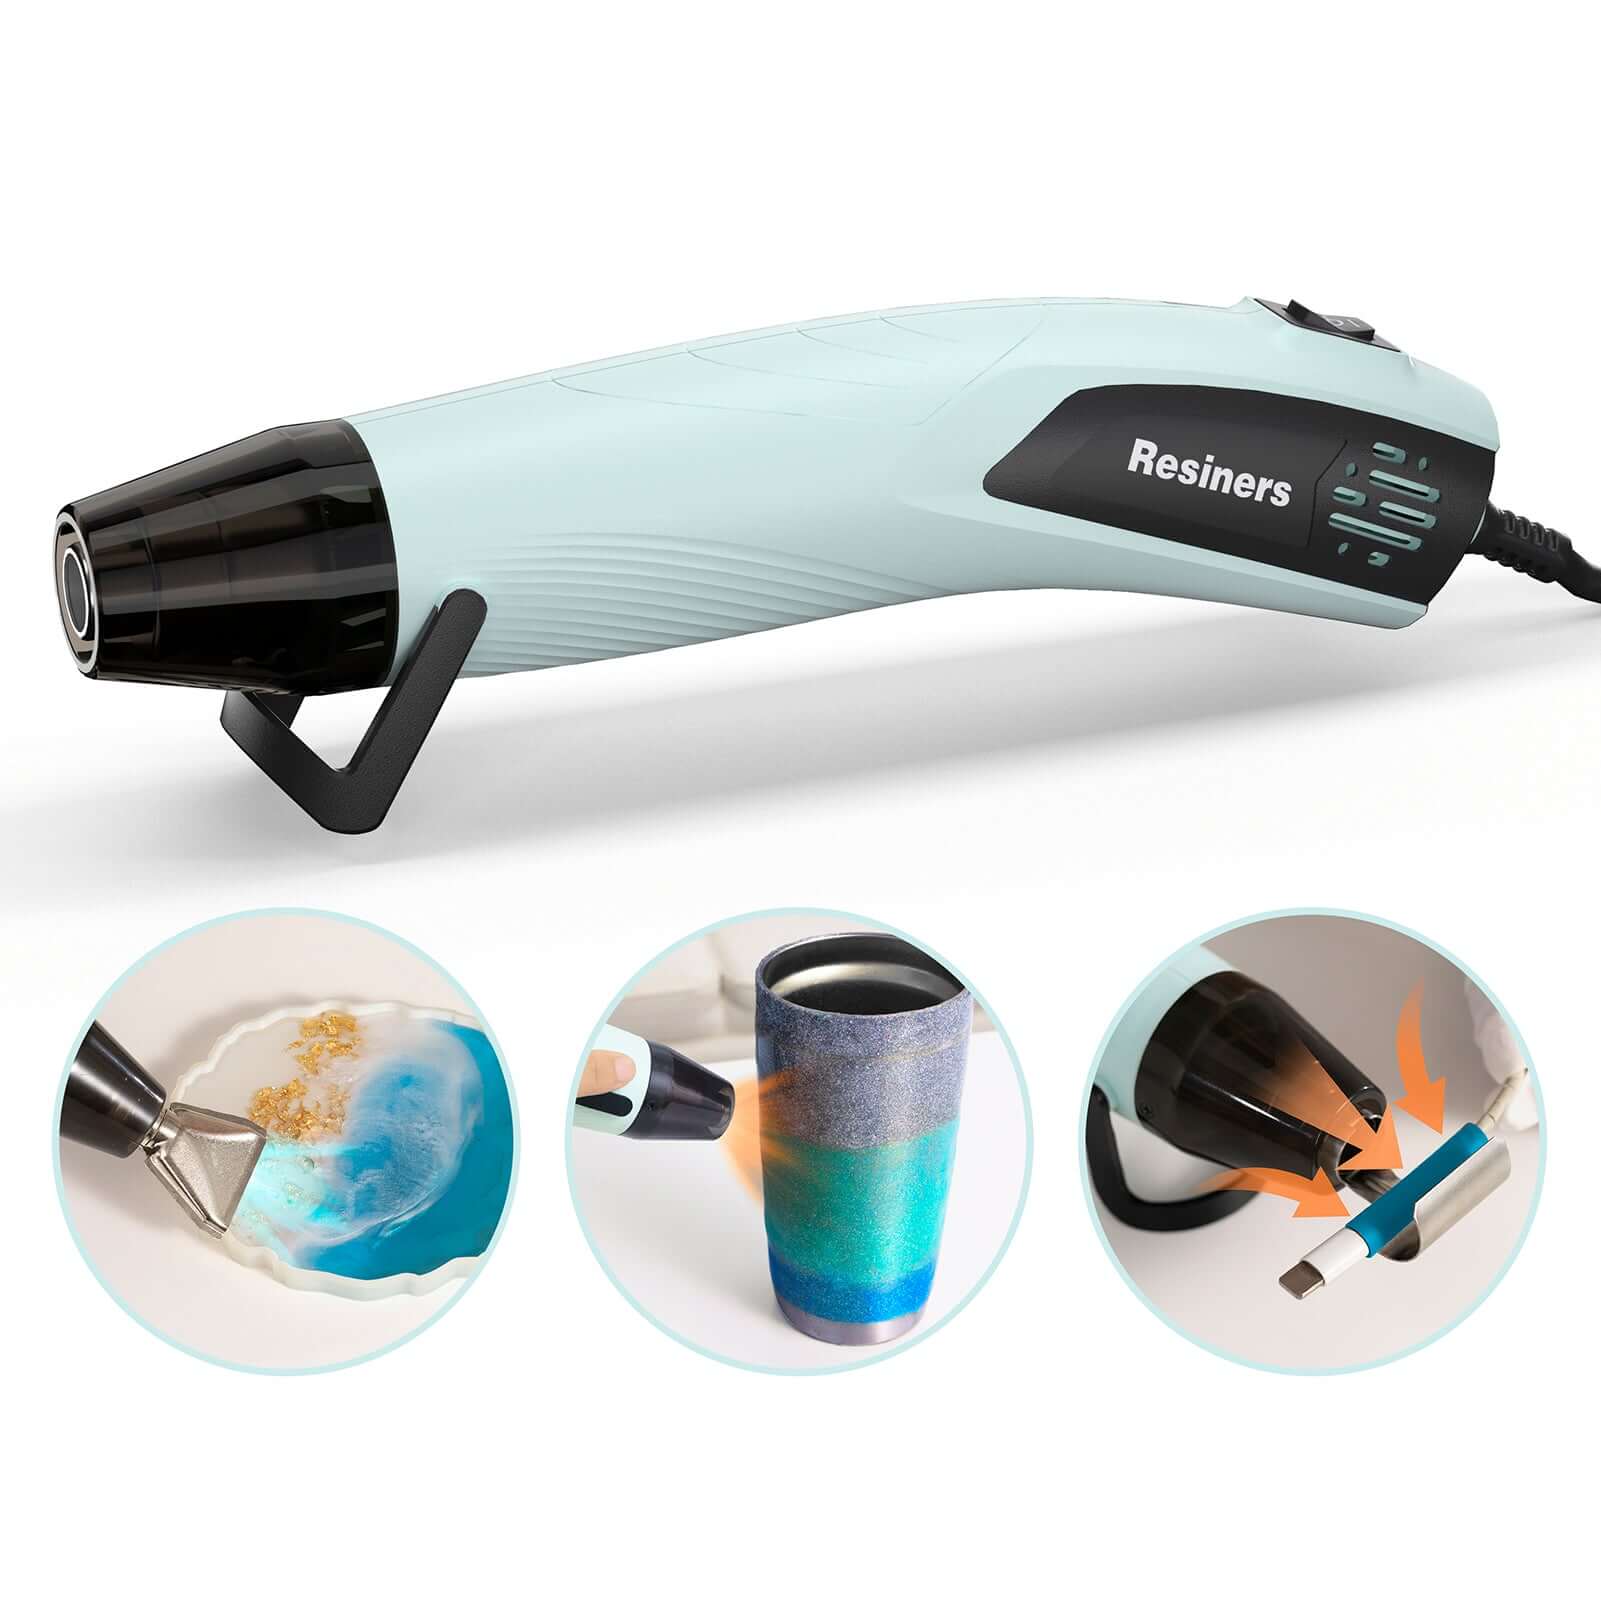 Mini Heat Gun, 350W Hot Air Gun 662℉ (350℃) with 2 Speed Setting, Poratble  Small Heat Gun with 4.9Ft Cable for Crafting, Shrink Wrapping, Embossing